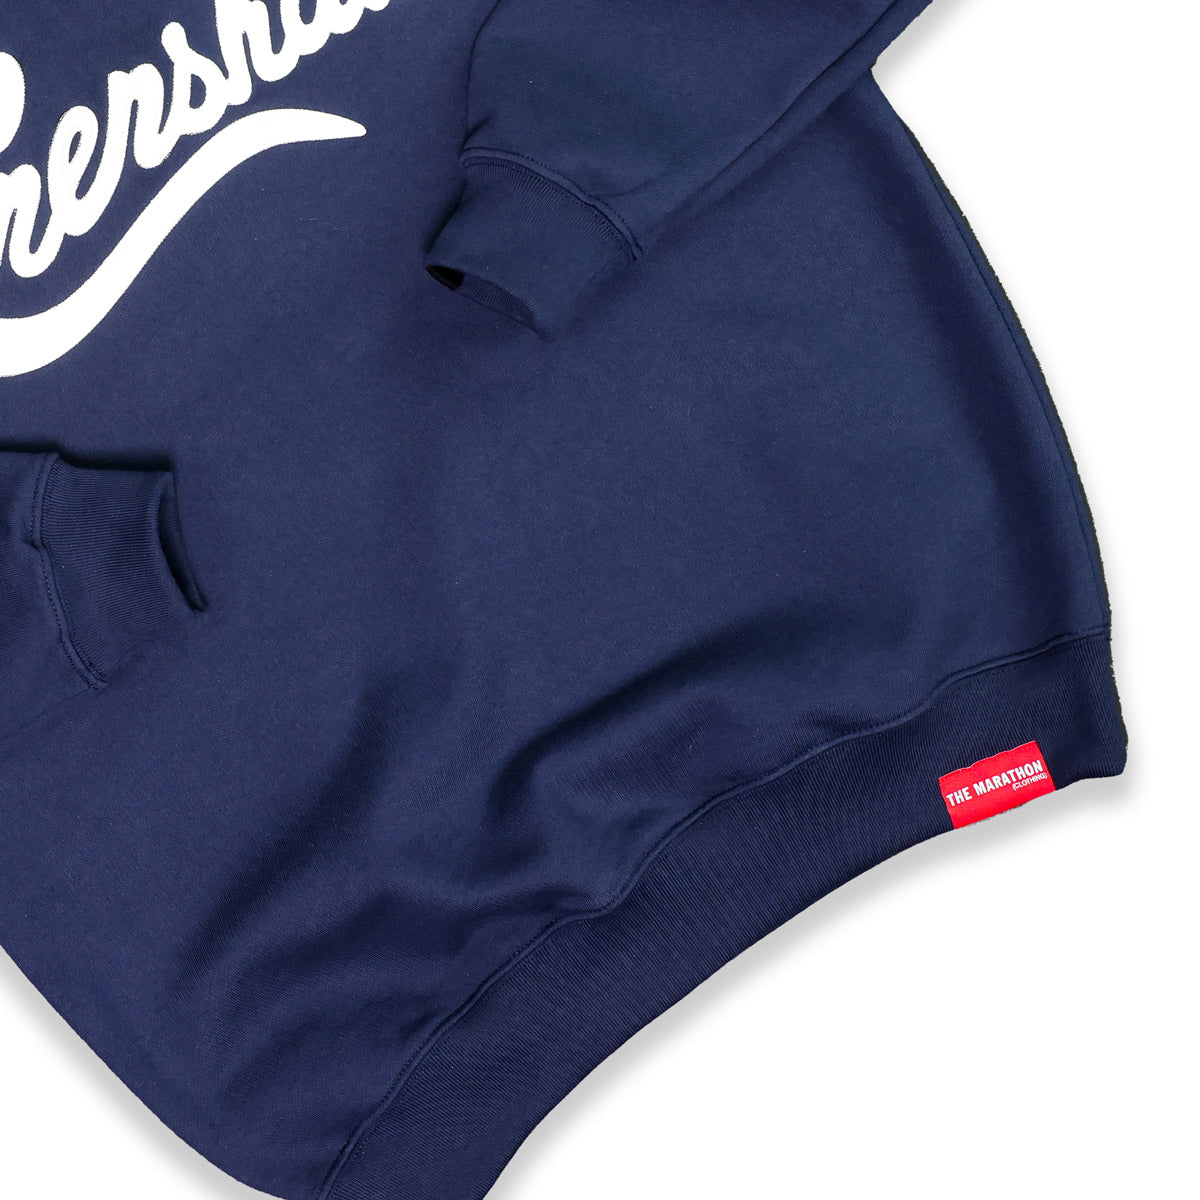 Limited Edition Ultra Crenshaw Crewneck - Navy/White - Detail 2